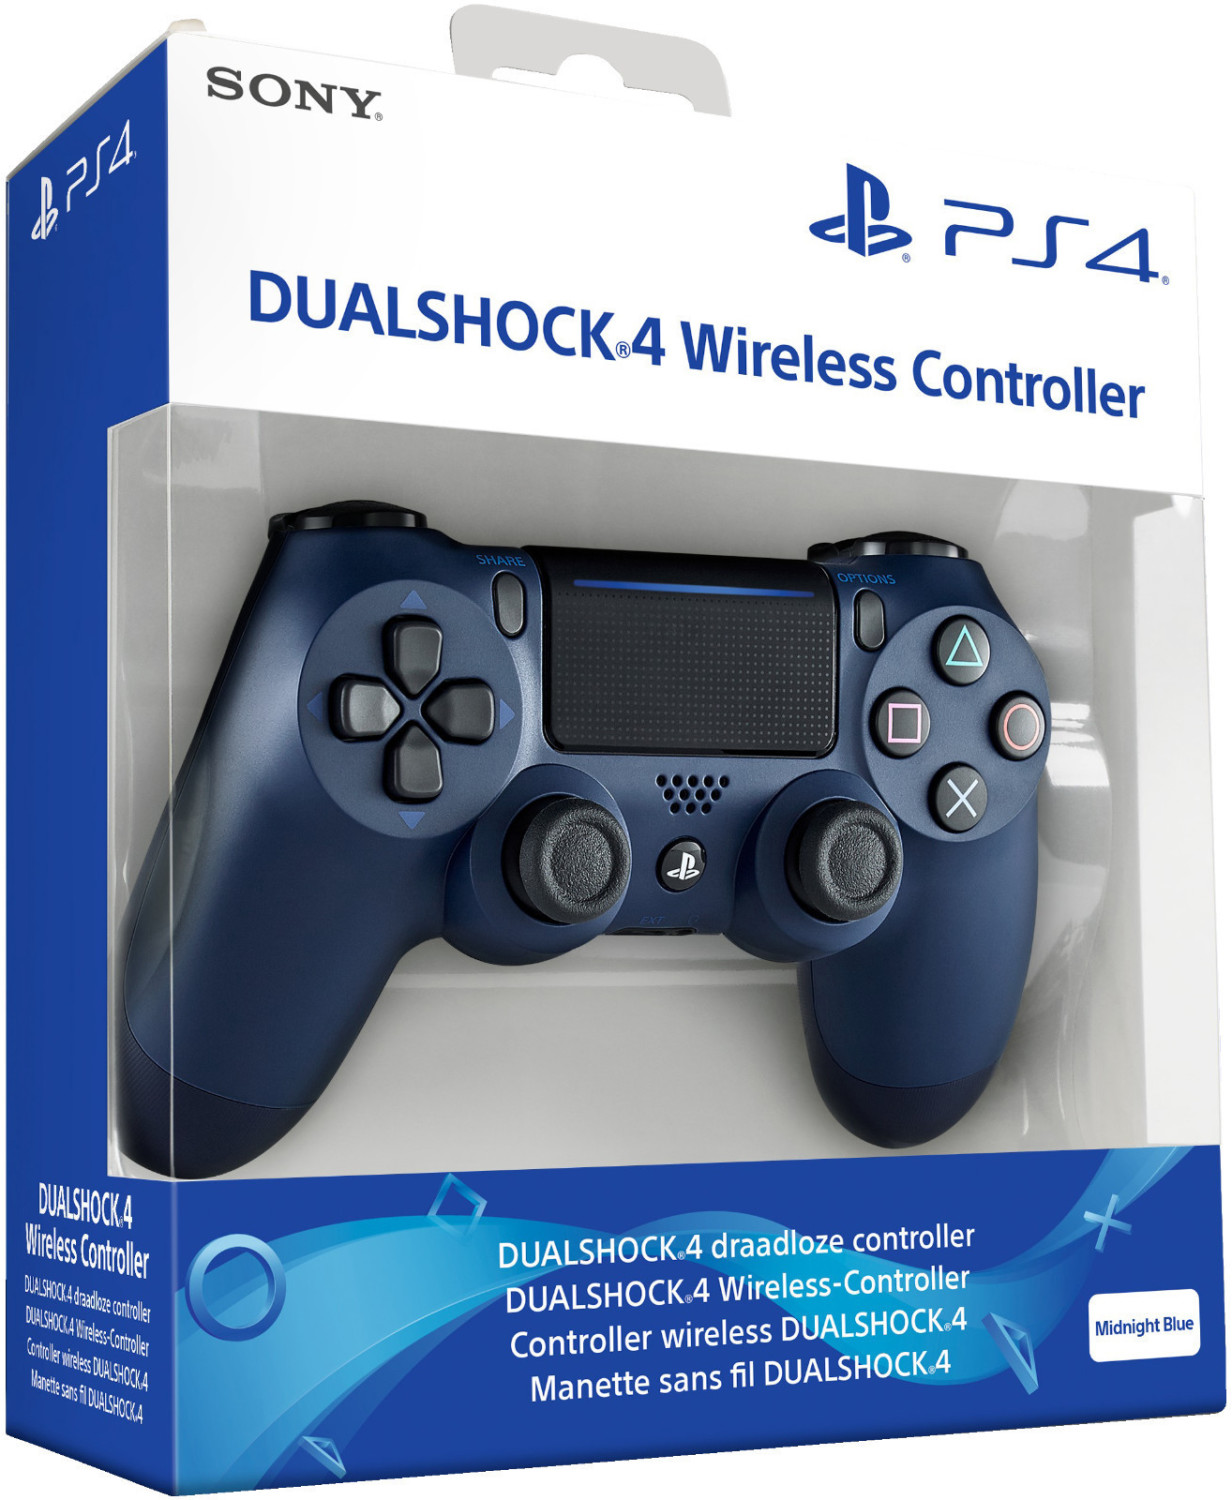 Buy Sony DualShock 4 Best (Today) (Midnight Controller £44.99 Deals – from on Blue)